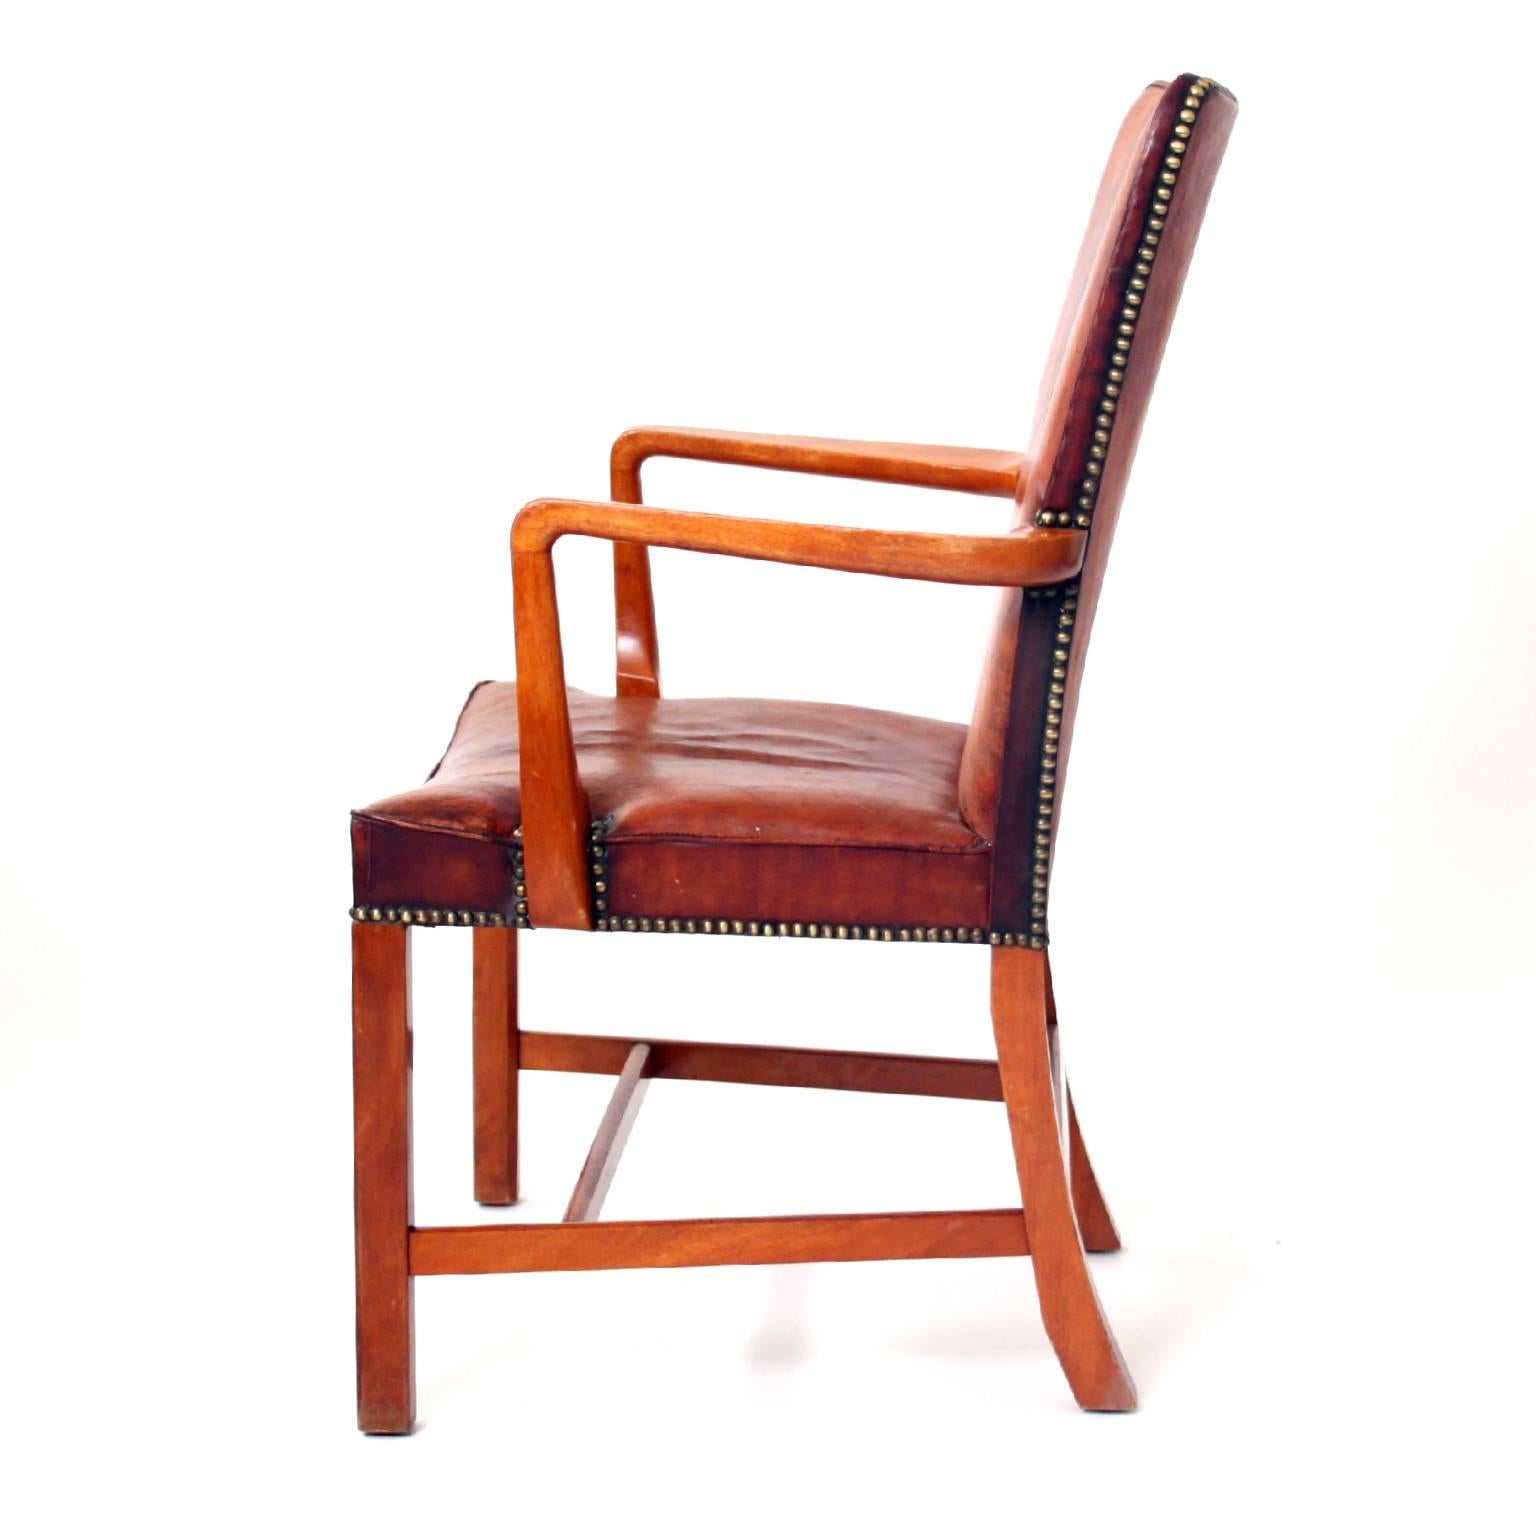 KAARE KLINT & RUD RASMUSSEN  -  MID-CENTURY MODERN DESIGN

This is an excellent original Kaare Klint 'Nørrevold' armchair, model no. 5999. This is the largest chair in the series of 